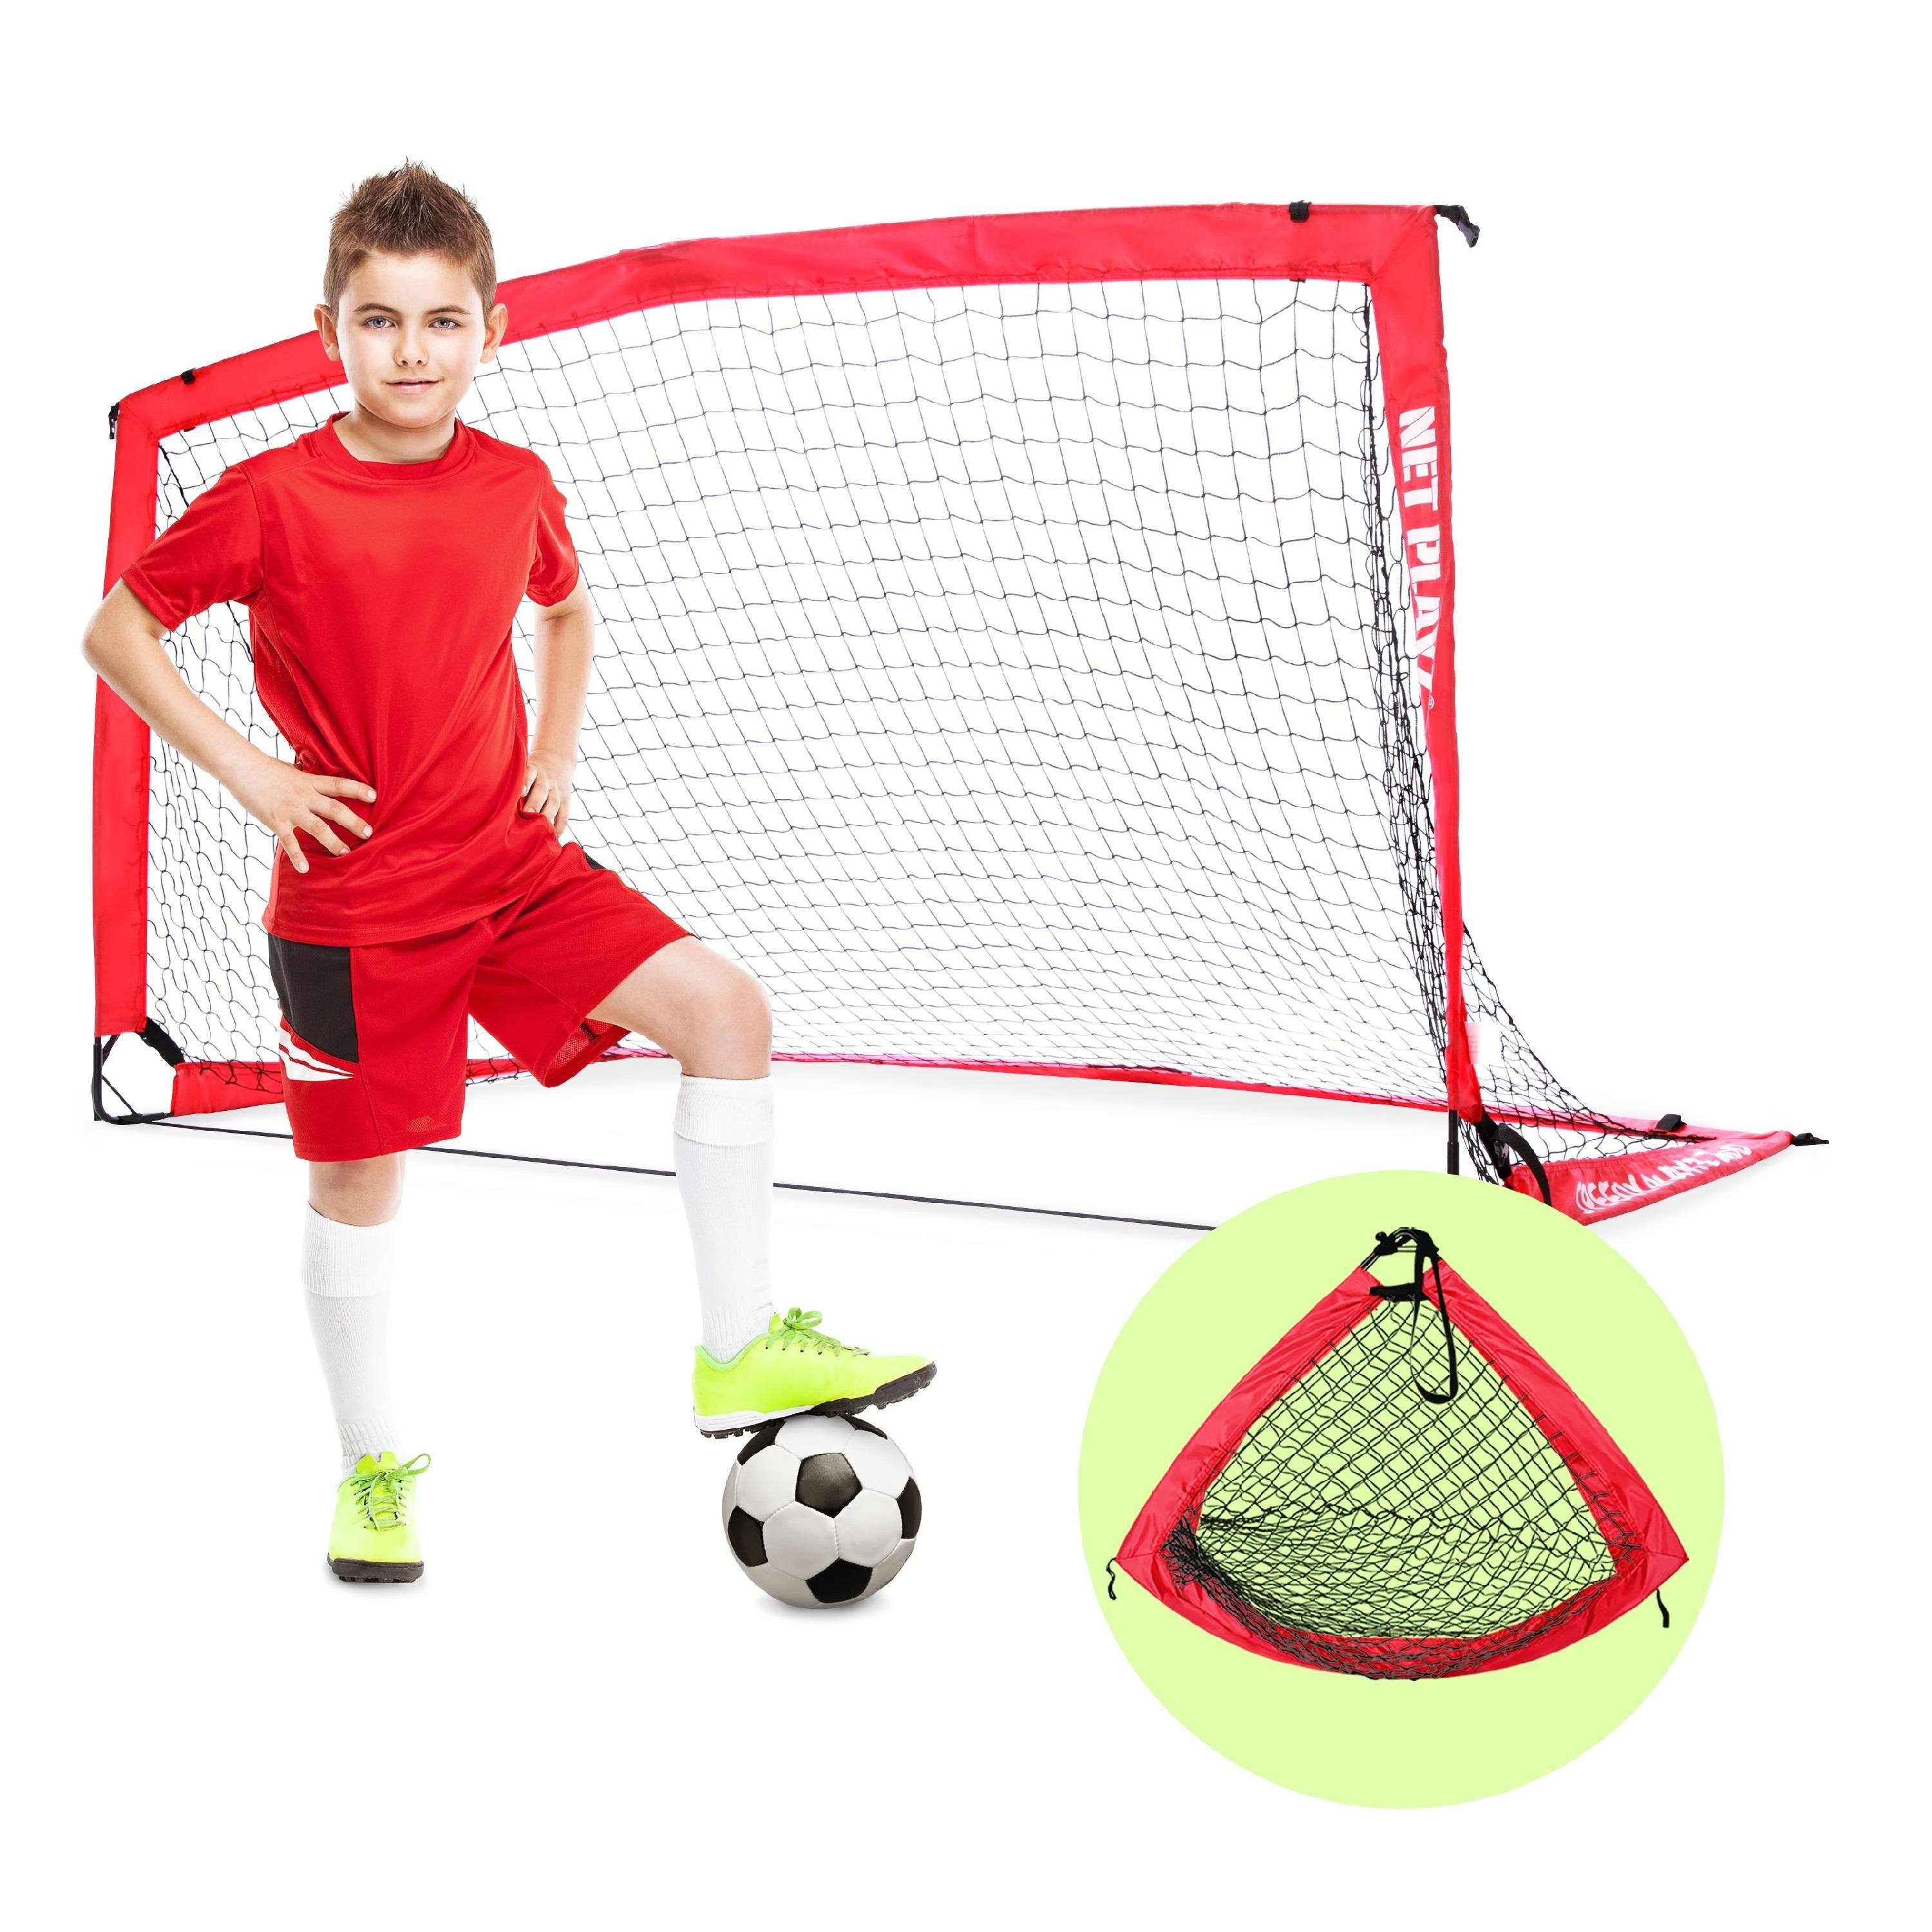 Portable Football Goal Pop Up Net Kids Outdoor Play Training Toy Gate Soccer New 